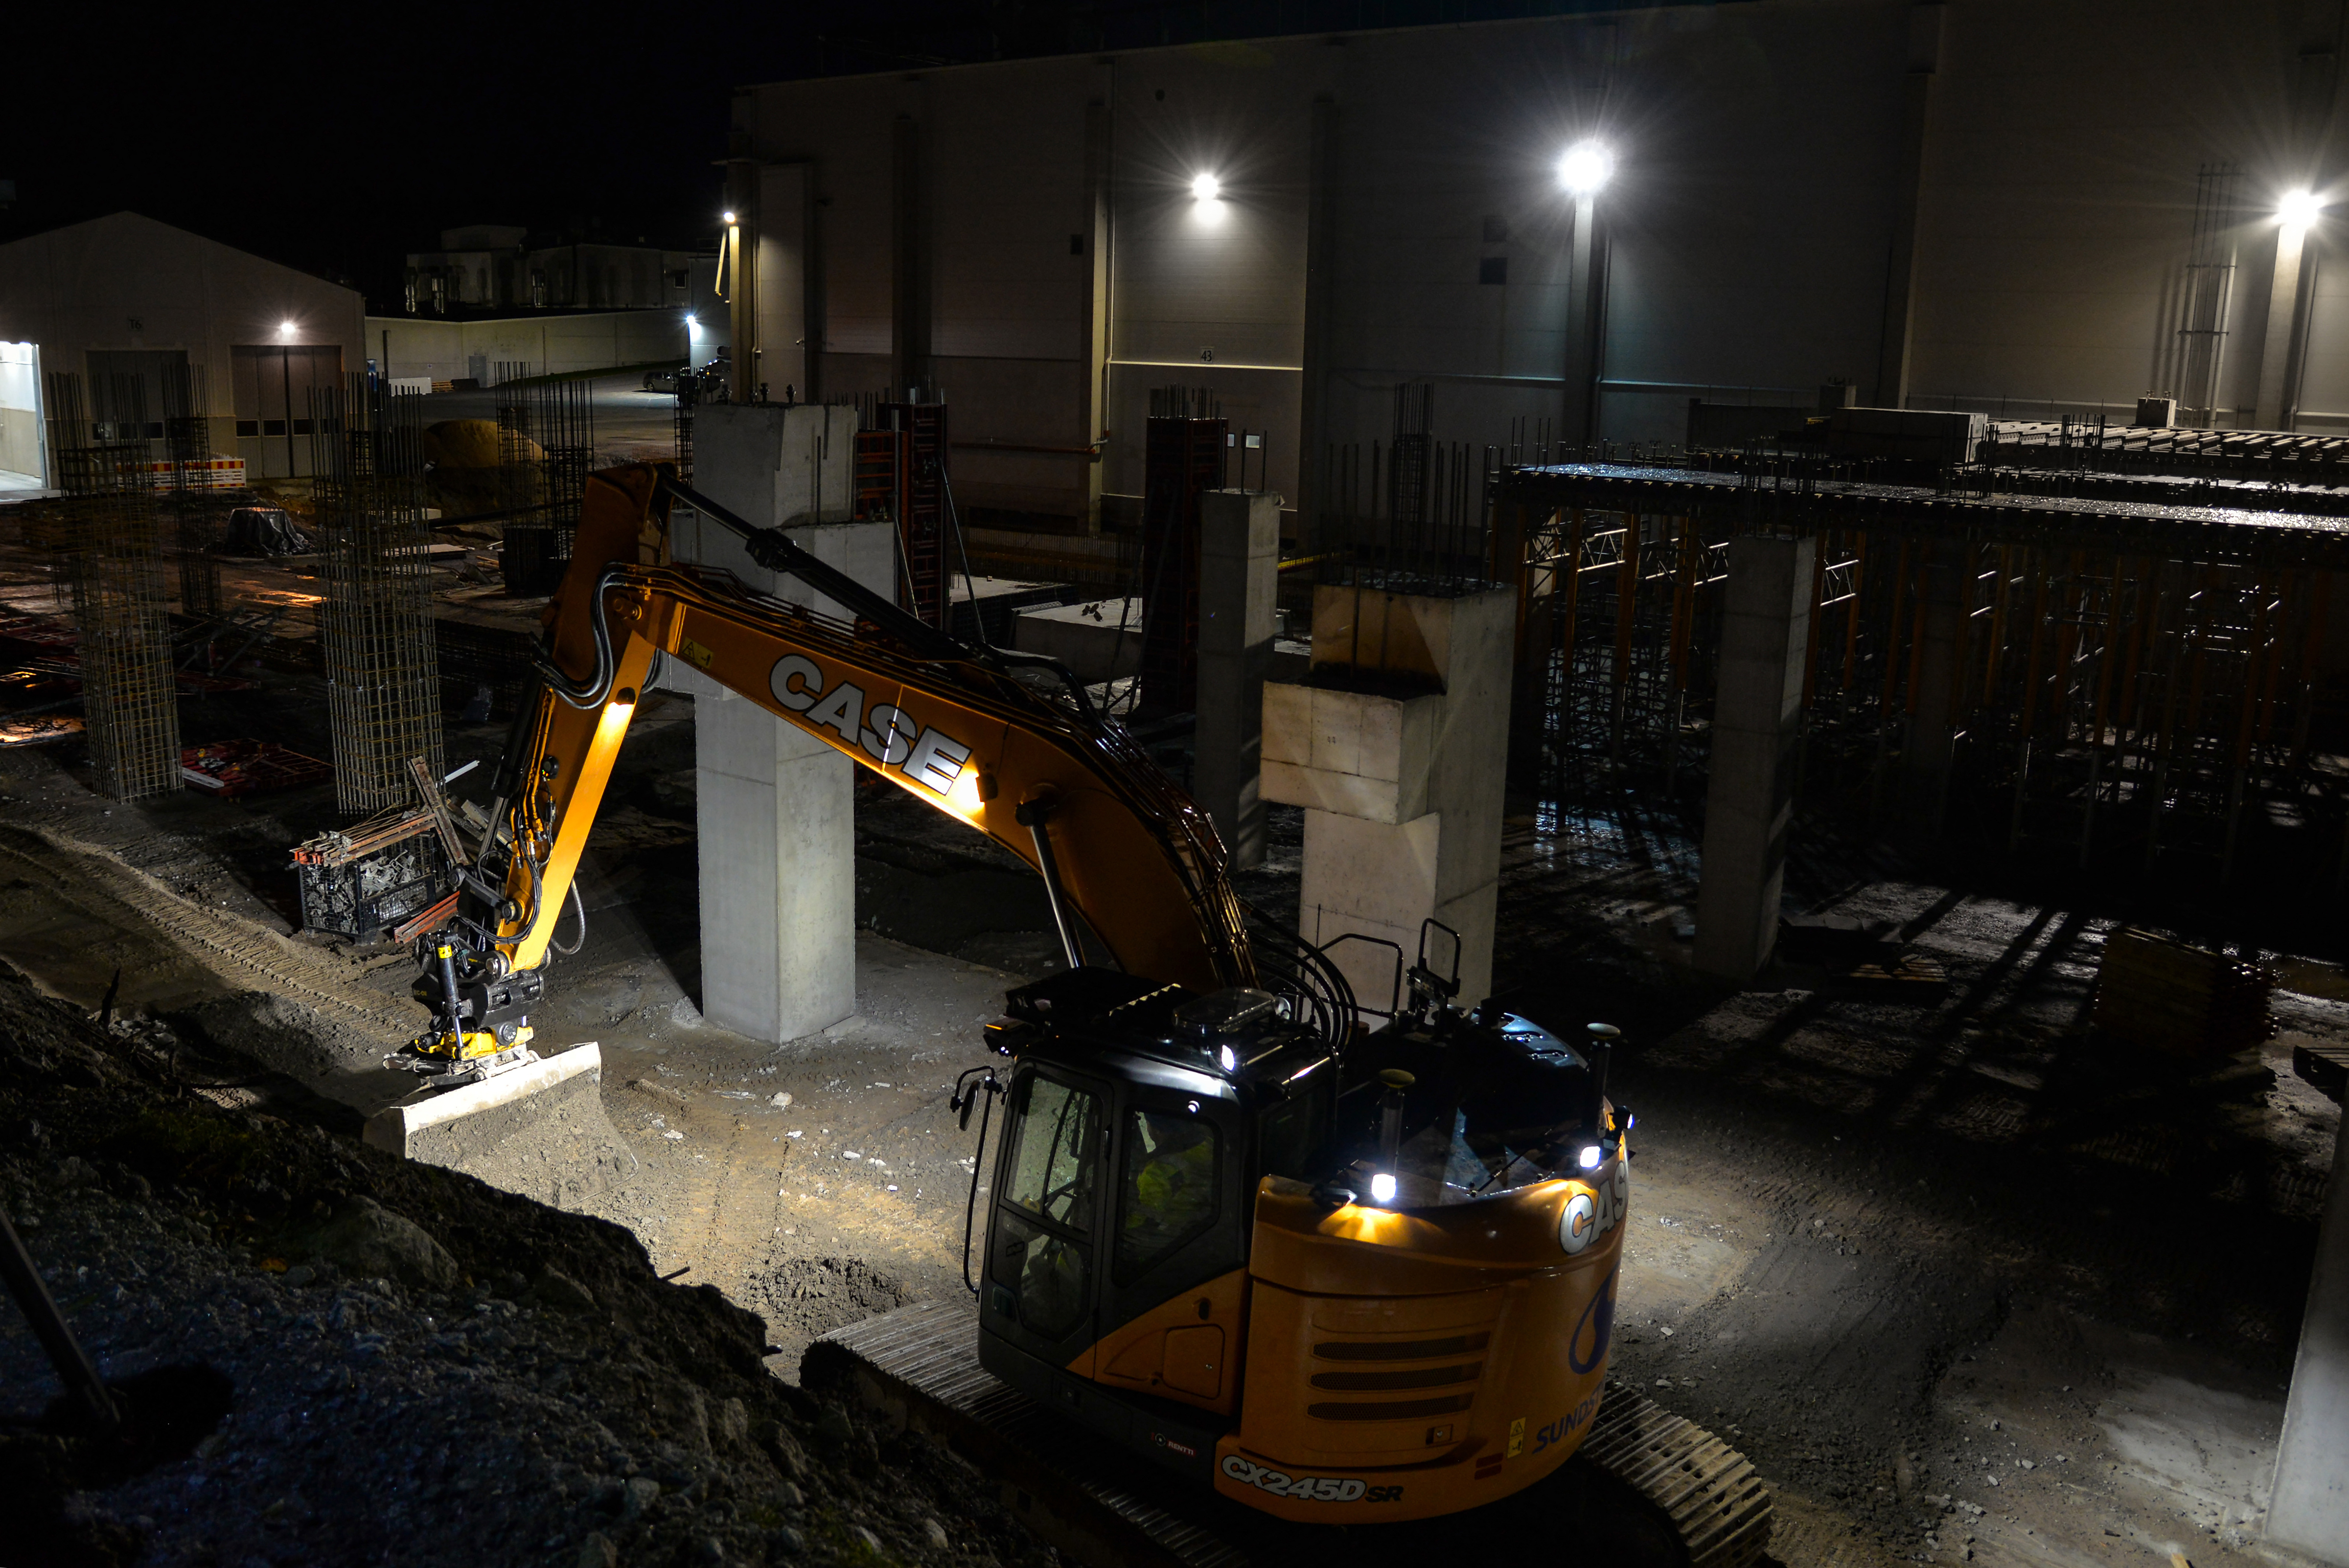 Excavator work lights - safely moving forward on construction projects